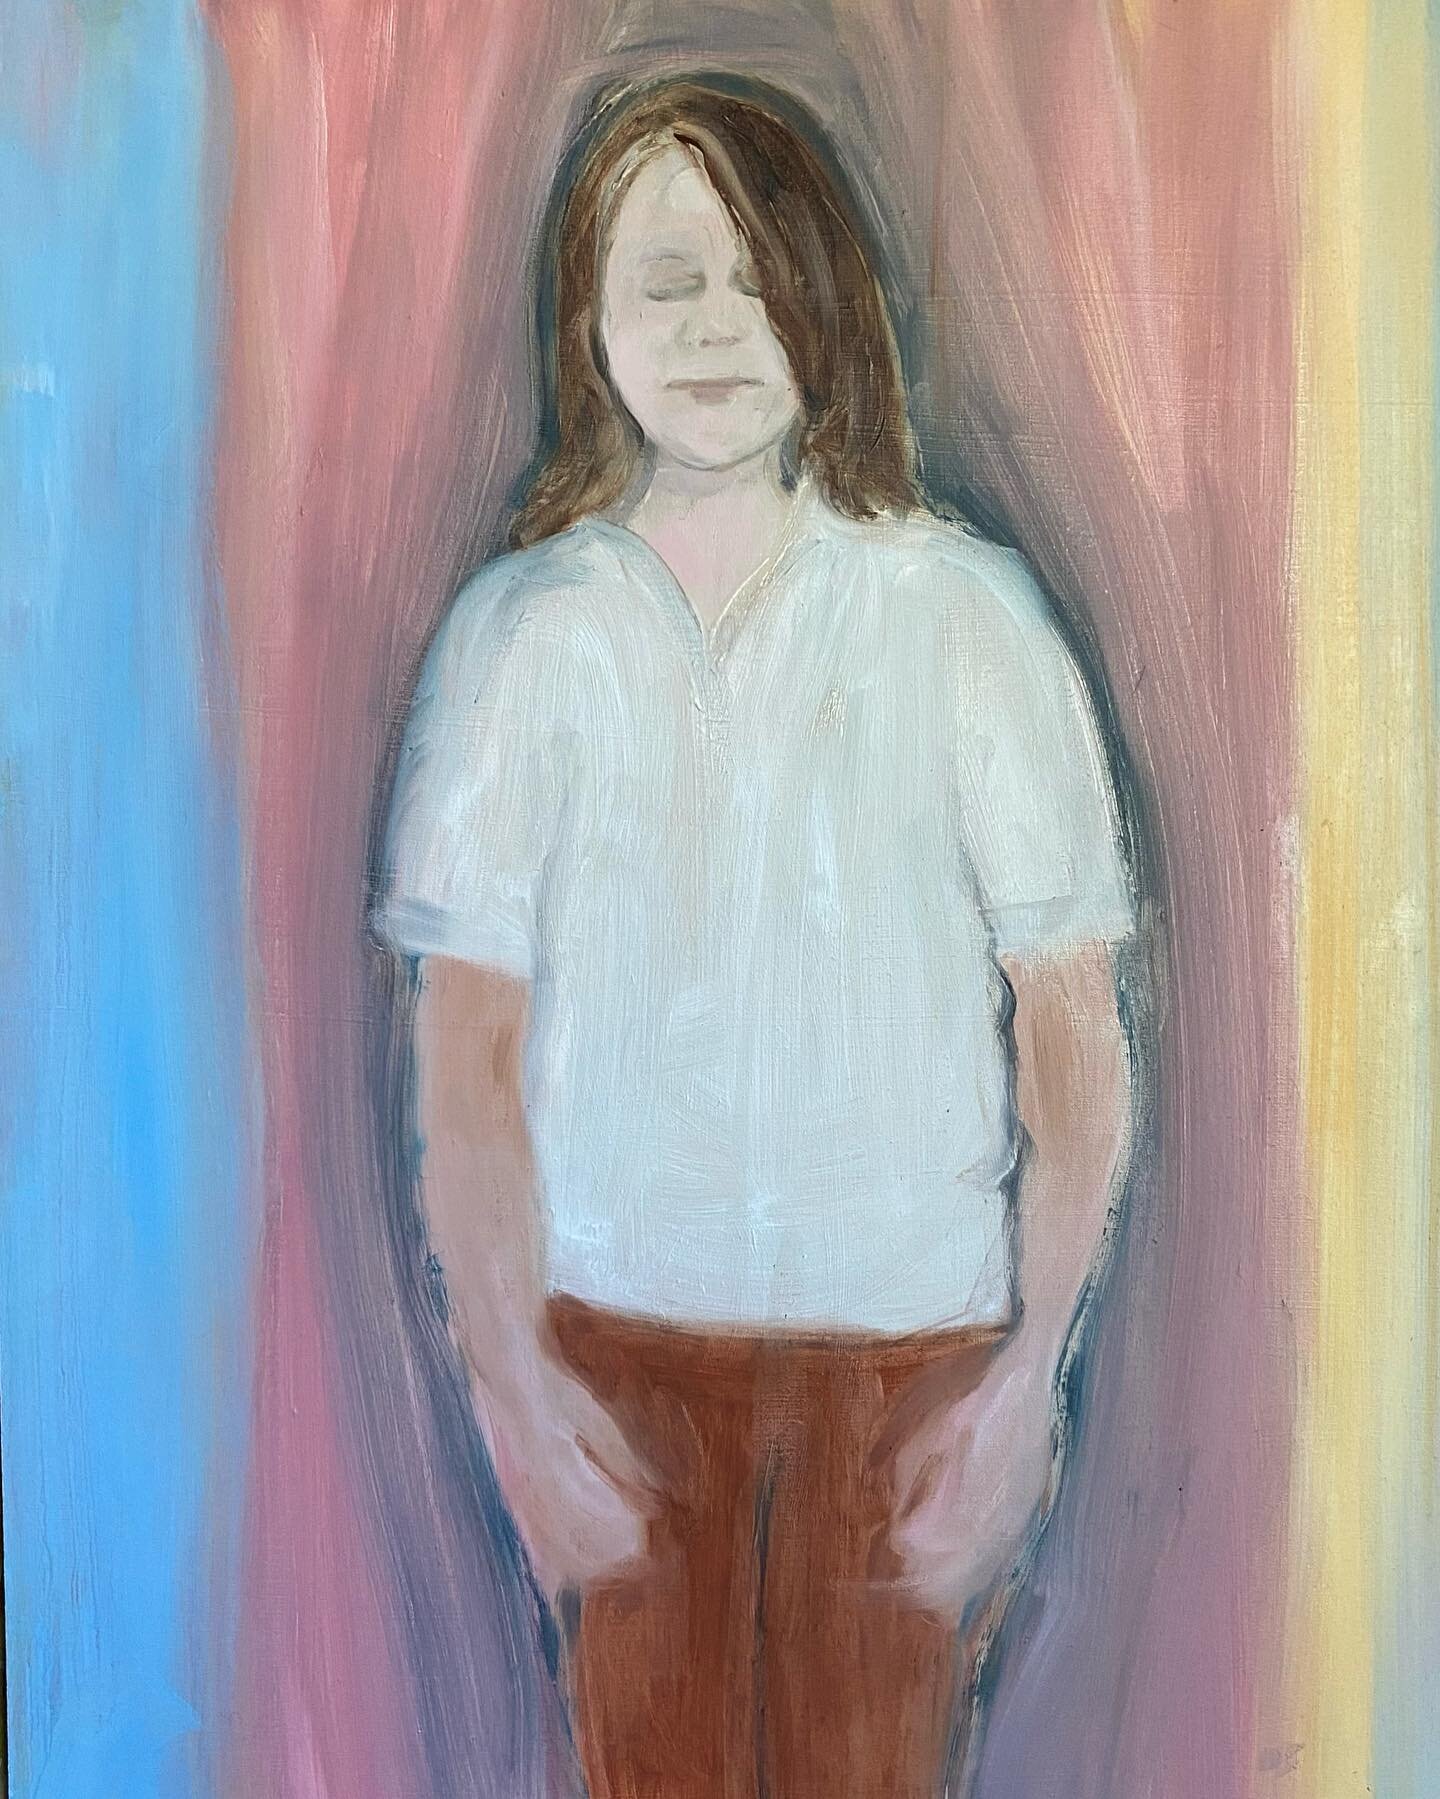 &lsquo;Make A Wish&rsquo; 2021. From a photo of my sister as a wee girl as the camera captures her with her eyes closed.
 

#dpatriciahay #artistsupportpledgeuk #paintpaintpaint #artists_insta #artistsoninsta #paintingoncanvas #canadianpainter #women